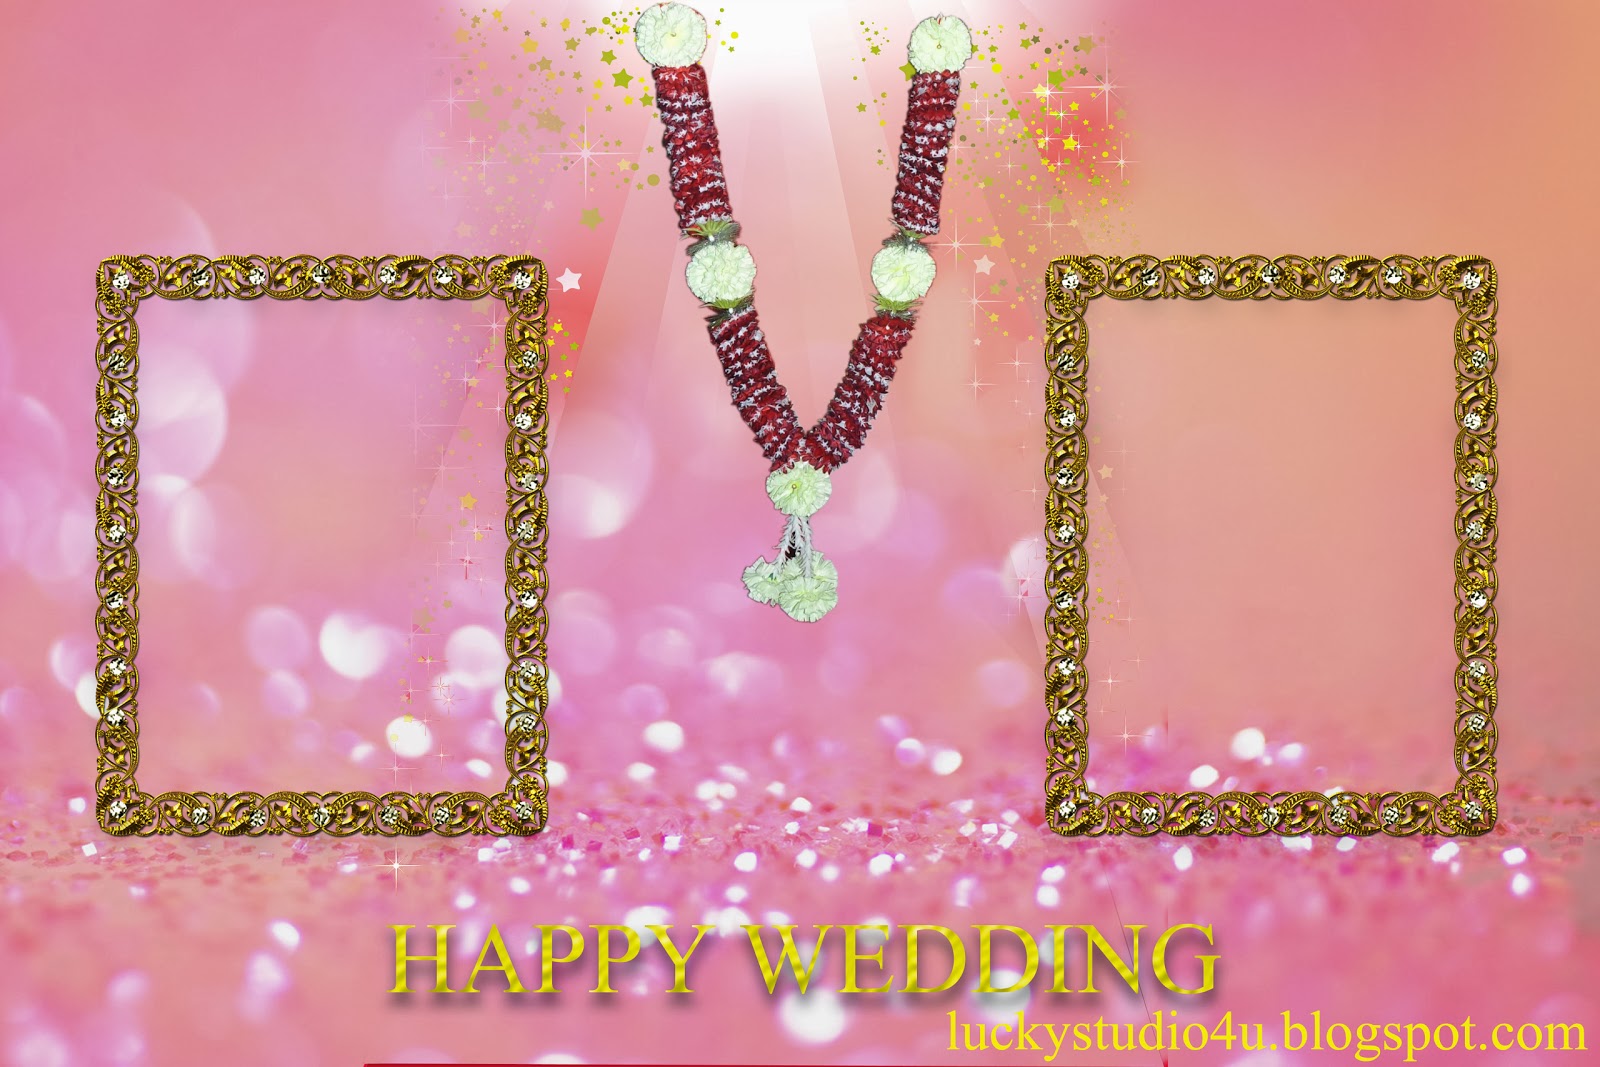 wedding clipart psd file free download - photo #49